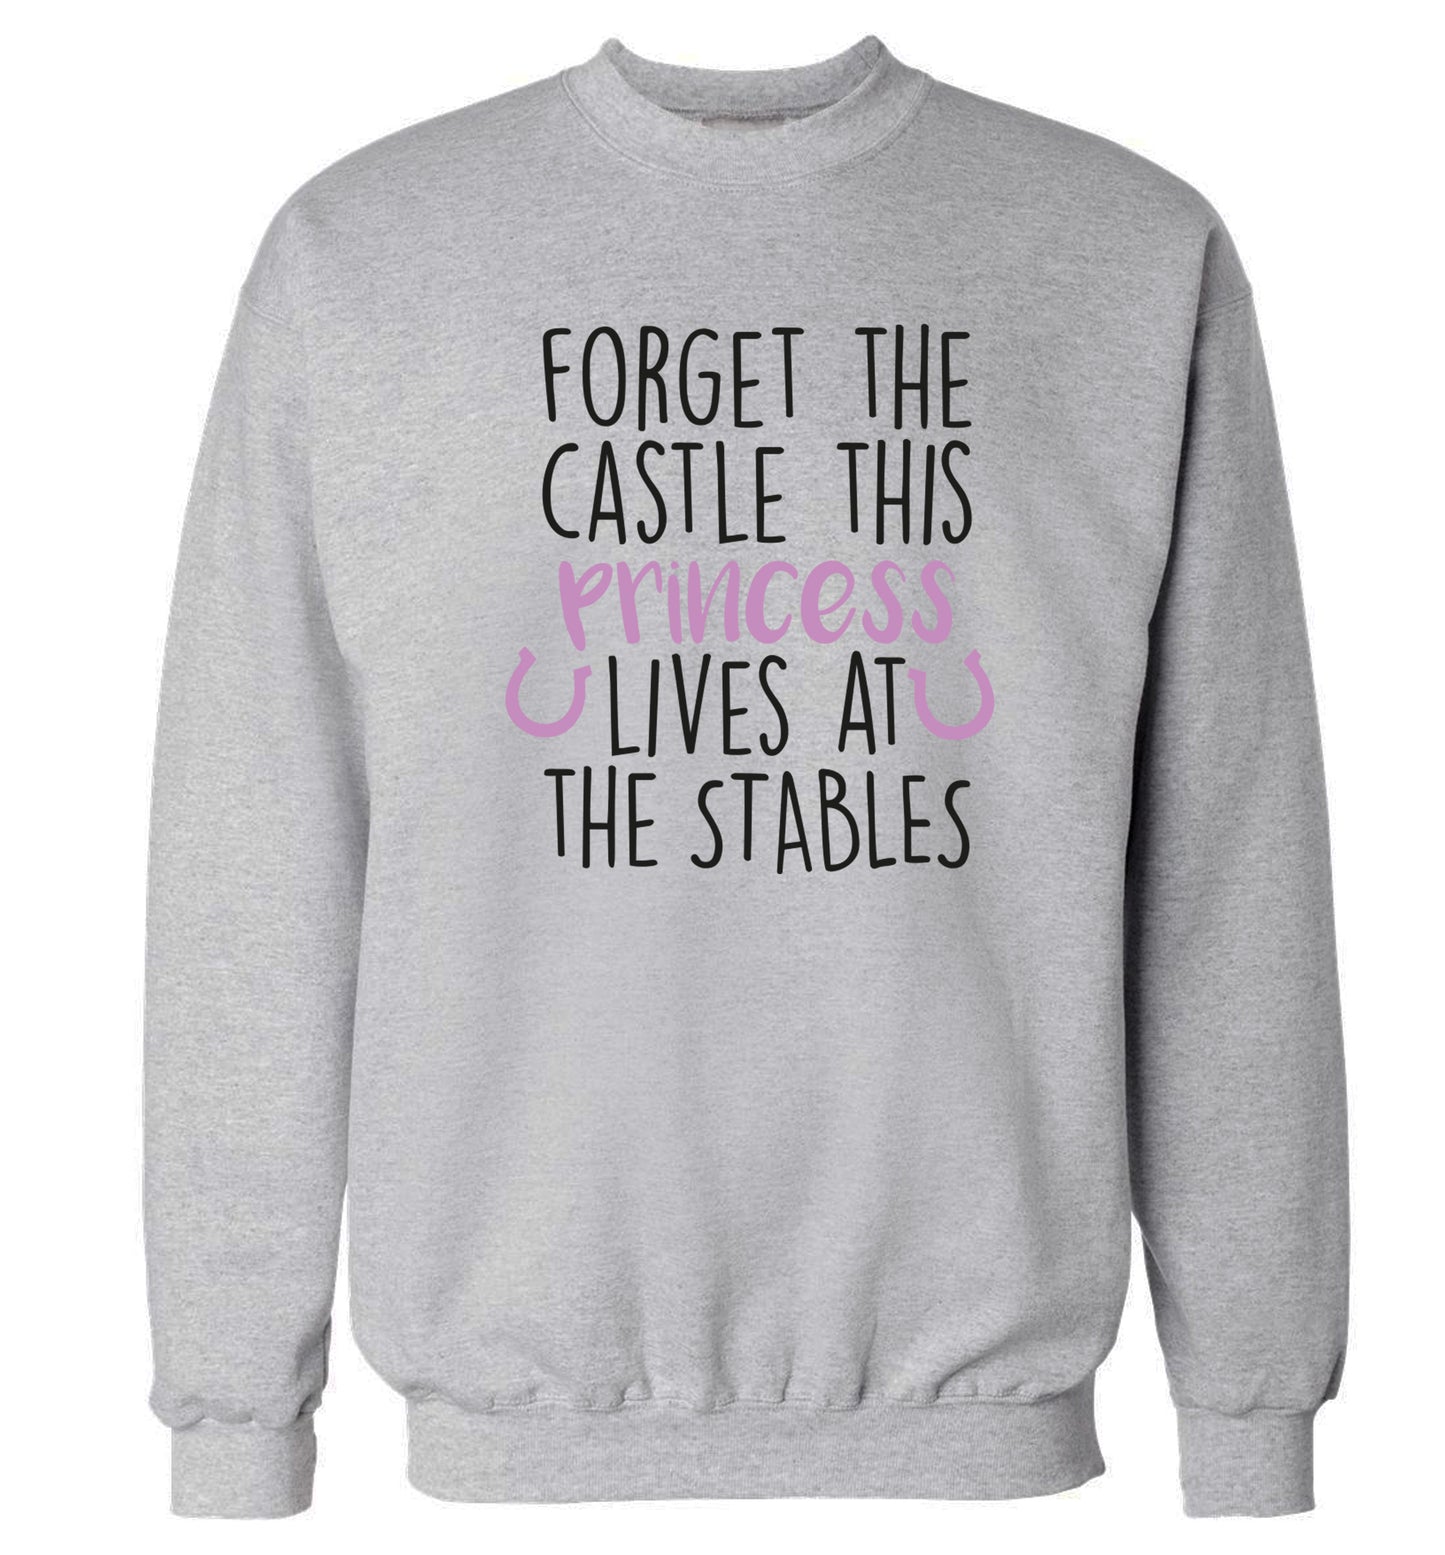 Forget the castle this princess lives at the stables Adult's unisex grey Sweater 2XL